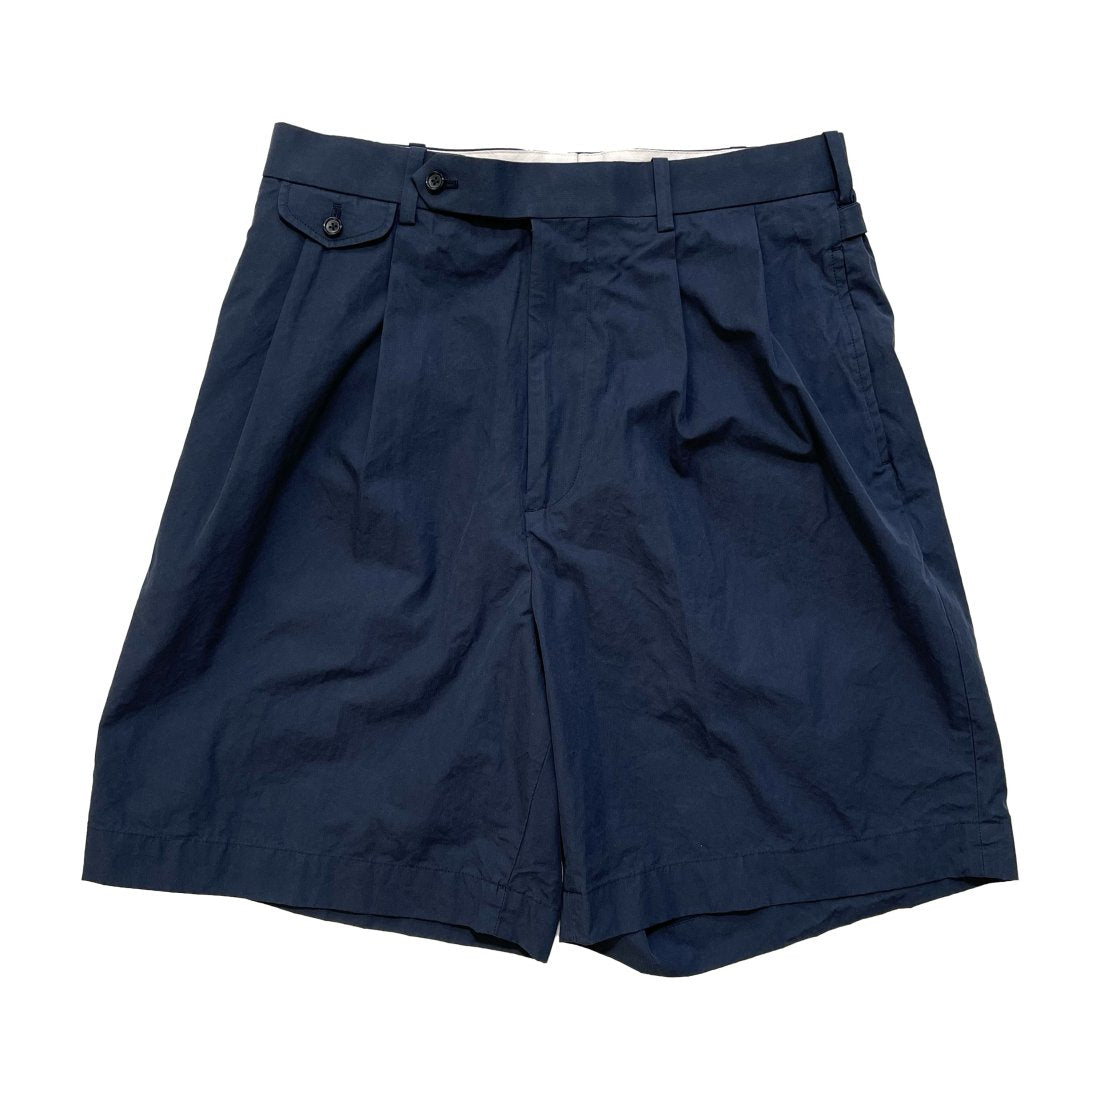 A.PRESSE / HIGH DENSITY WEATHER CLOTH SHORTS